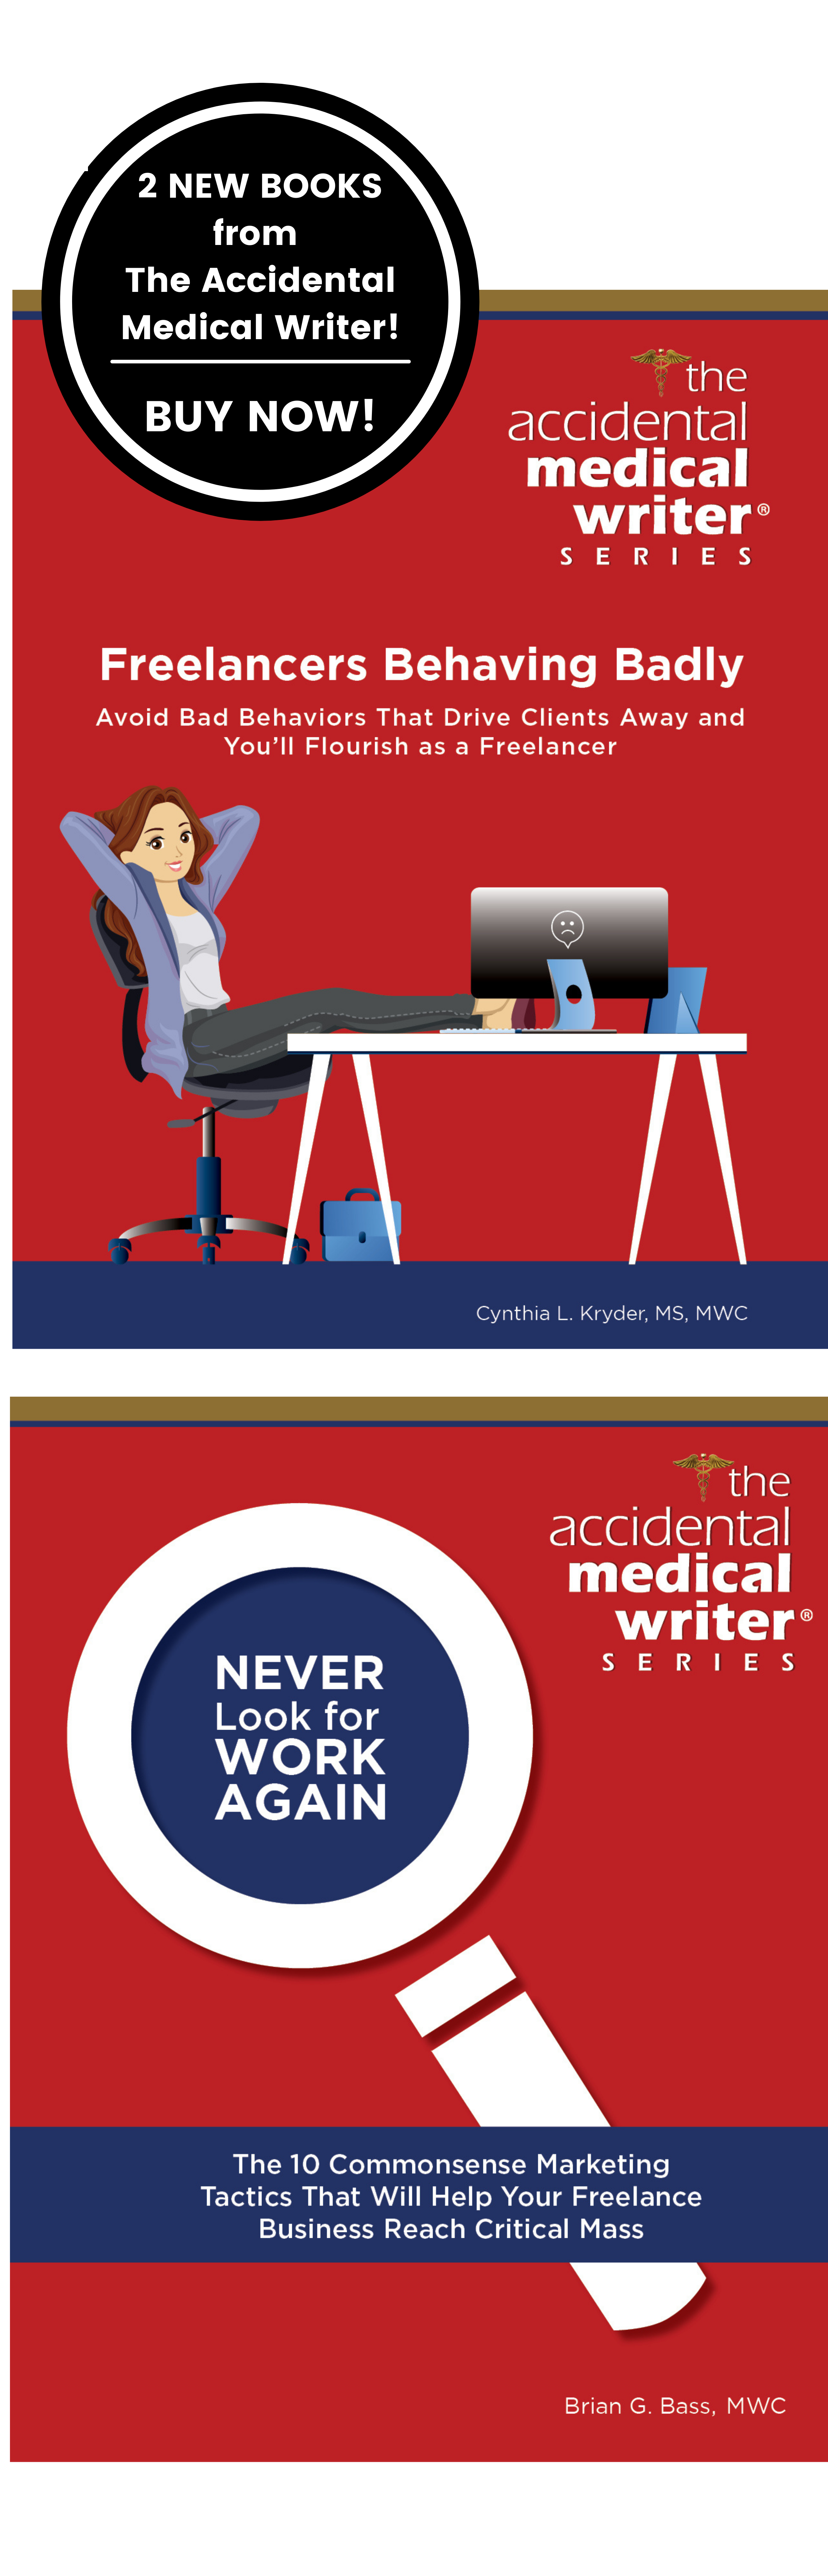 Home - The Accidental Medical Writer